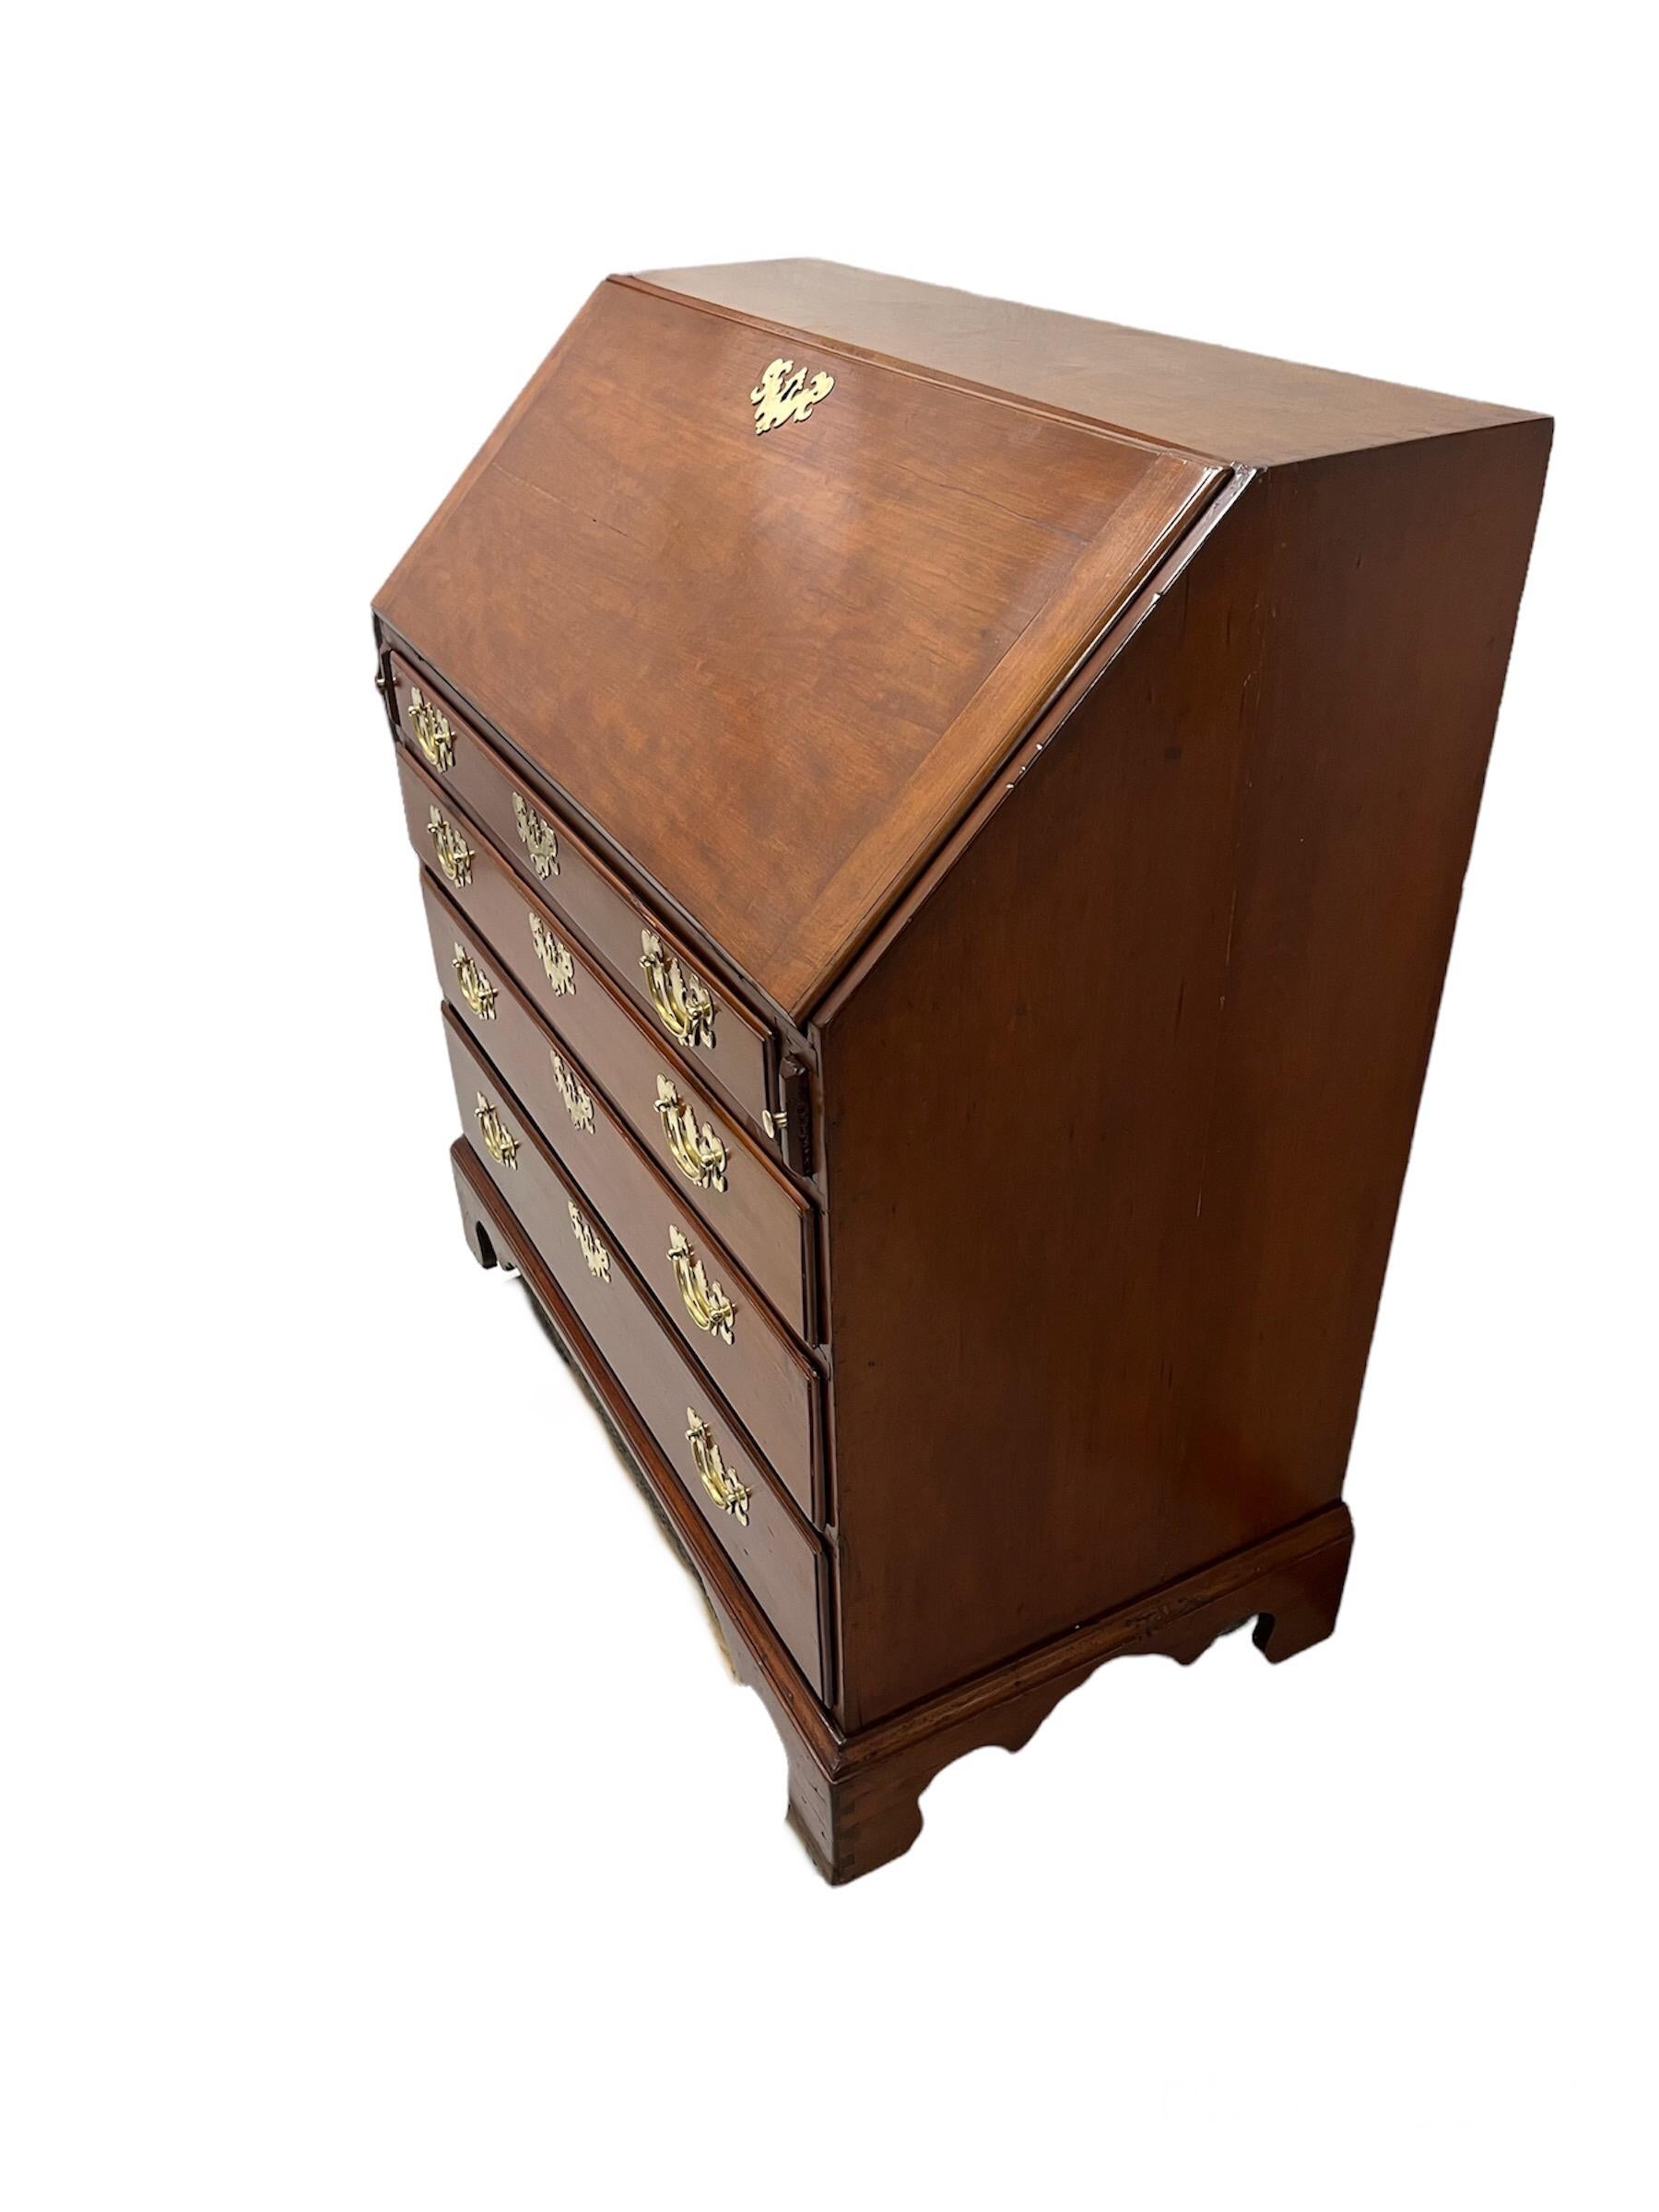 American Cherry Wood Slant front Desk  with fitted interior with a center door flanked by pigeon hole compartments above four graduated drawers. Raised on bracket feet. With brass handles,back plates & Keyhole discussions.